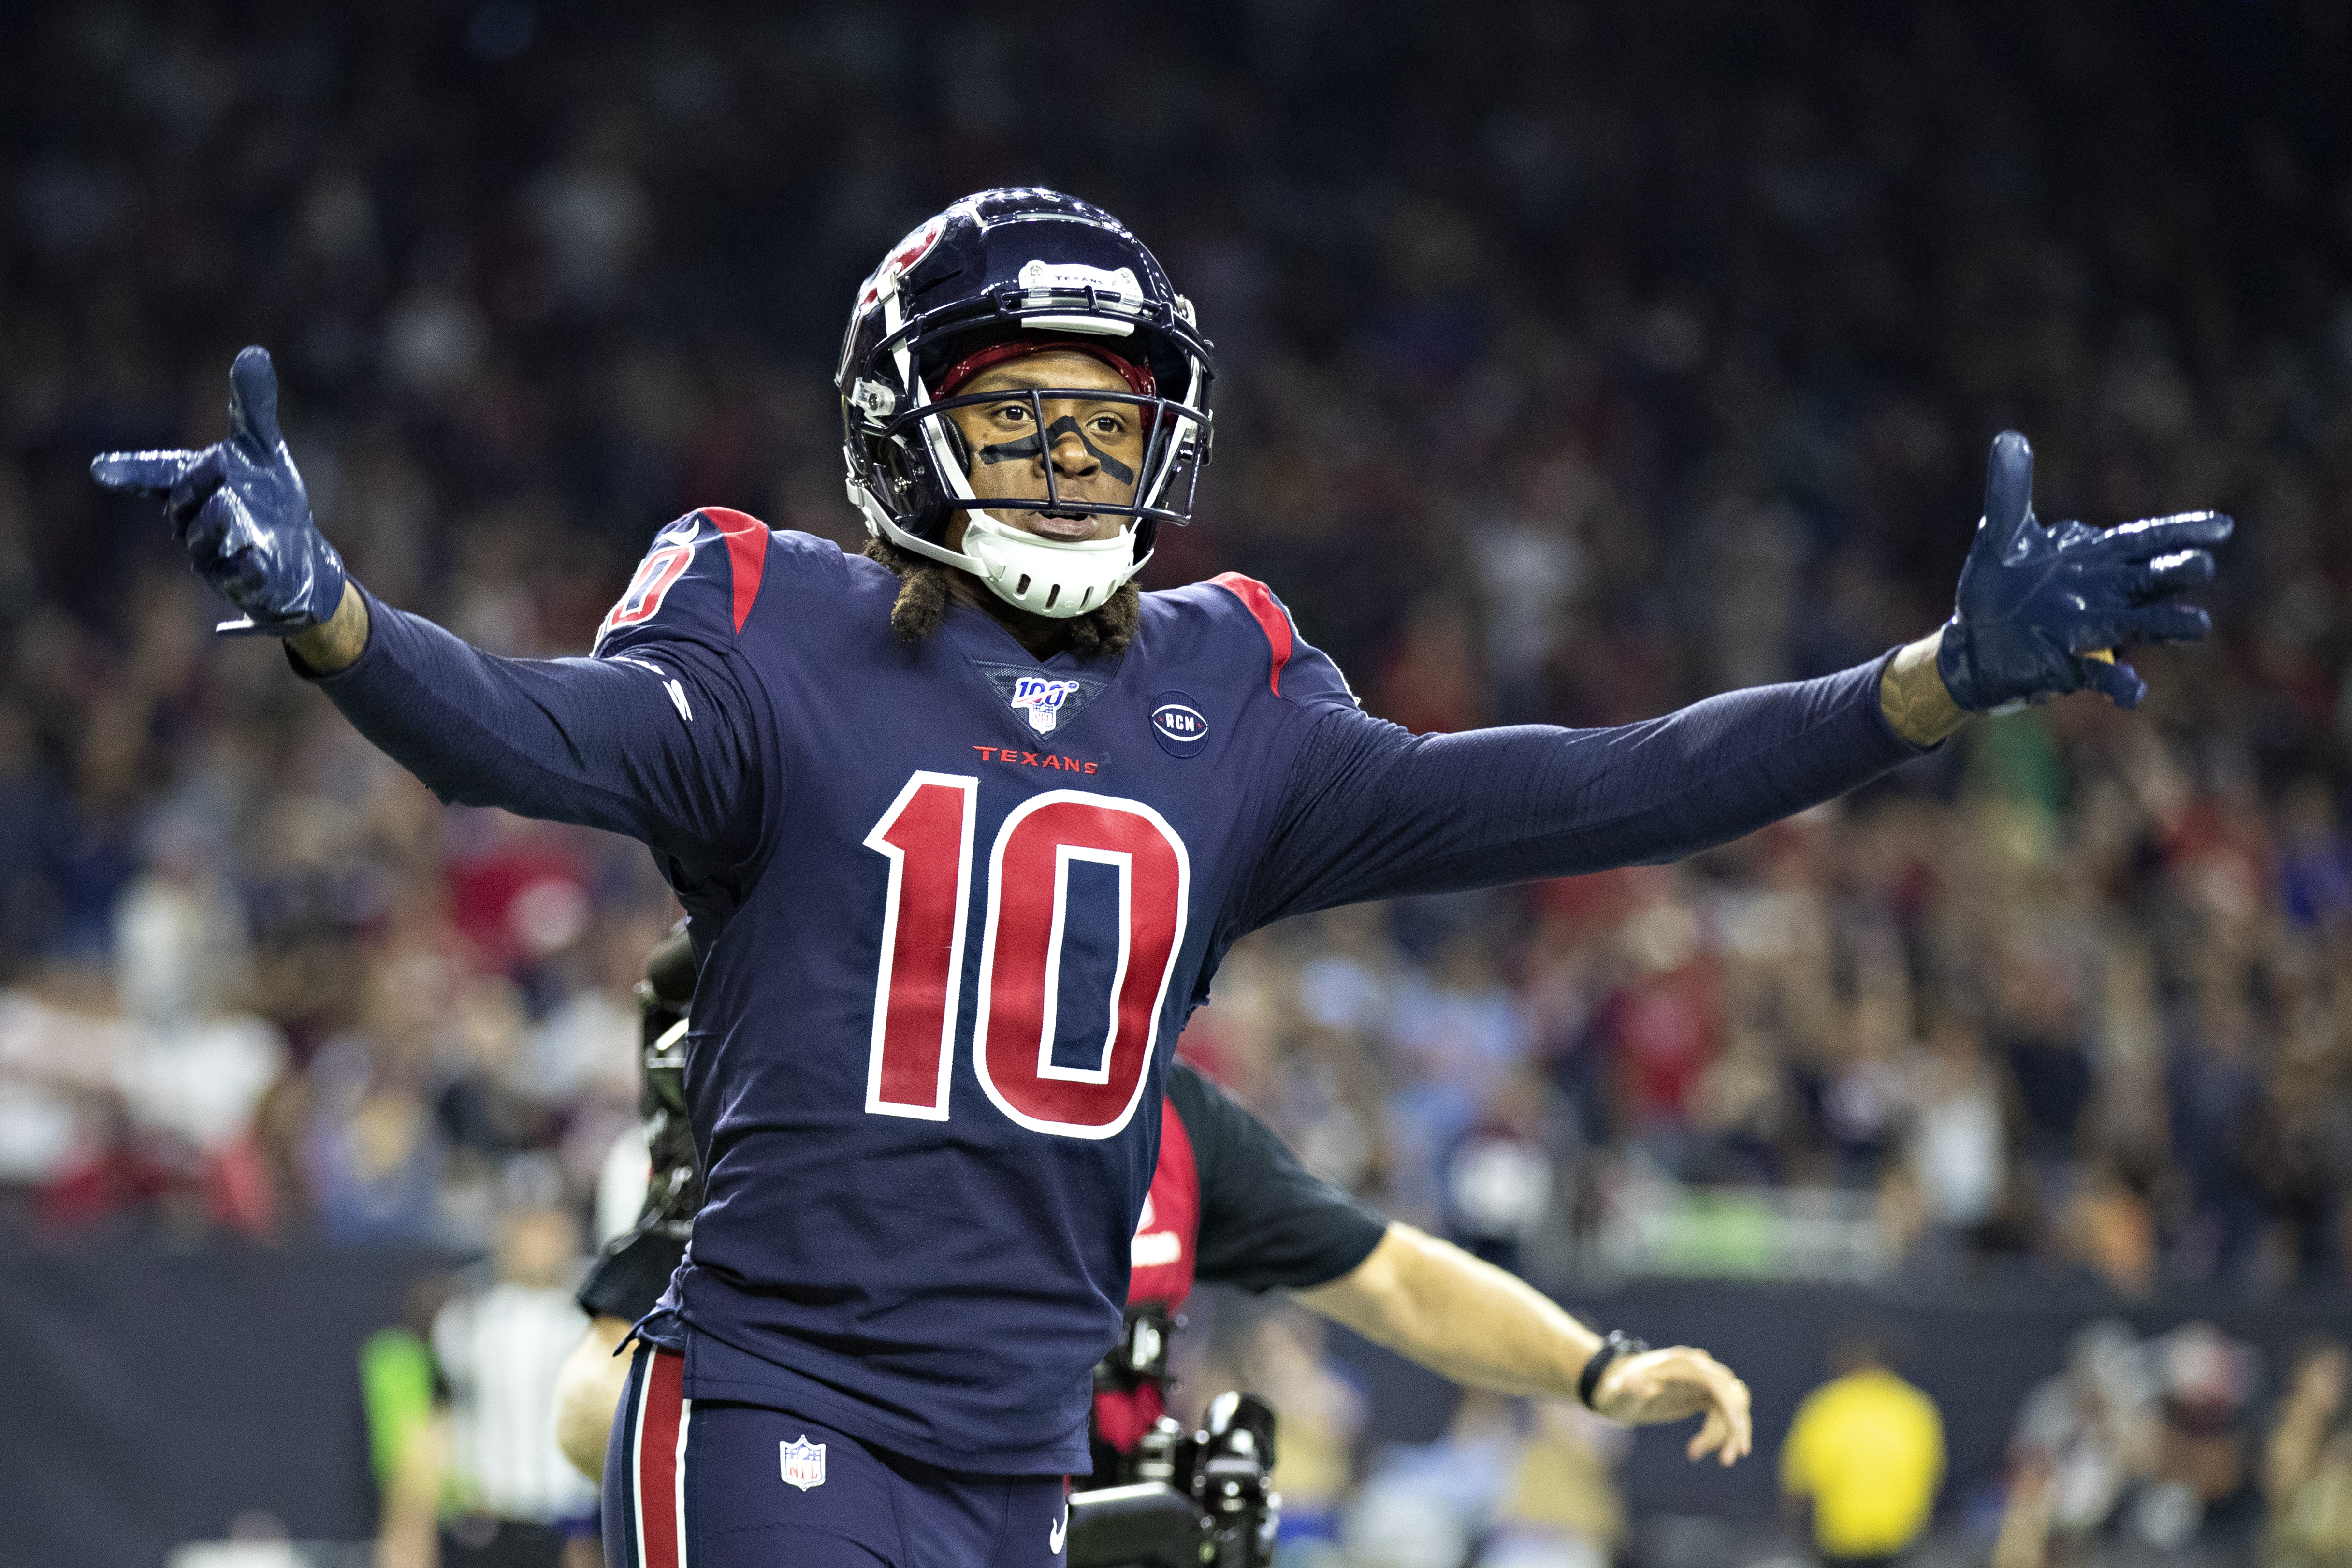 DeAndre Hopkins #10 of the Houston Texans celebrates after catching a pass for a touchdown during the second half of a game against the Indianapolis Colts at NRG Stadium on November 21, 2019 in Houston, Texas. The Texans defeated the Colts 20-17.